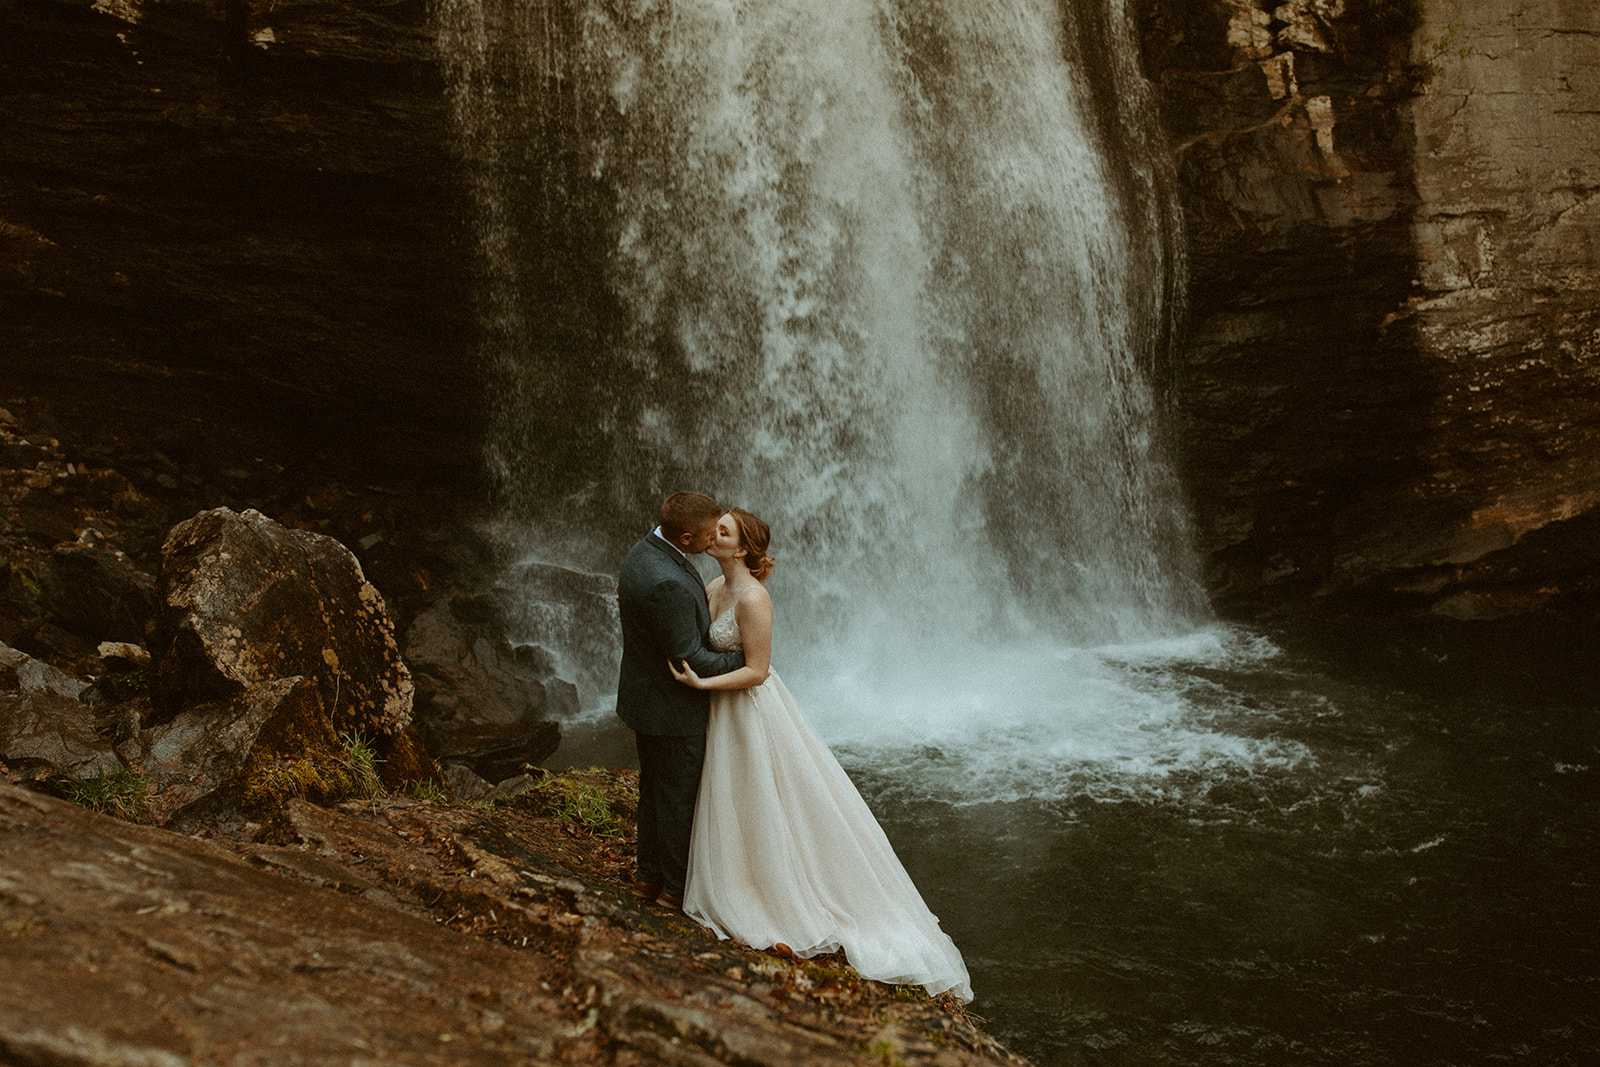 A couple who just got married stands near a waterfall embracing each other in their wedding attire.